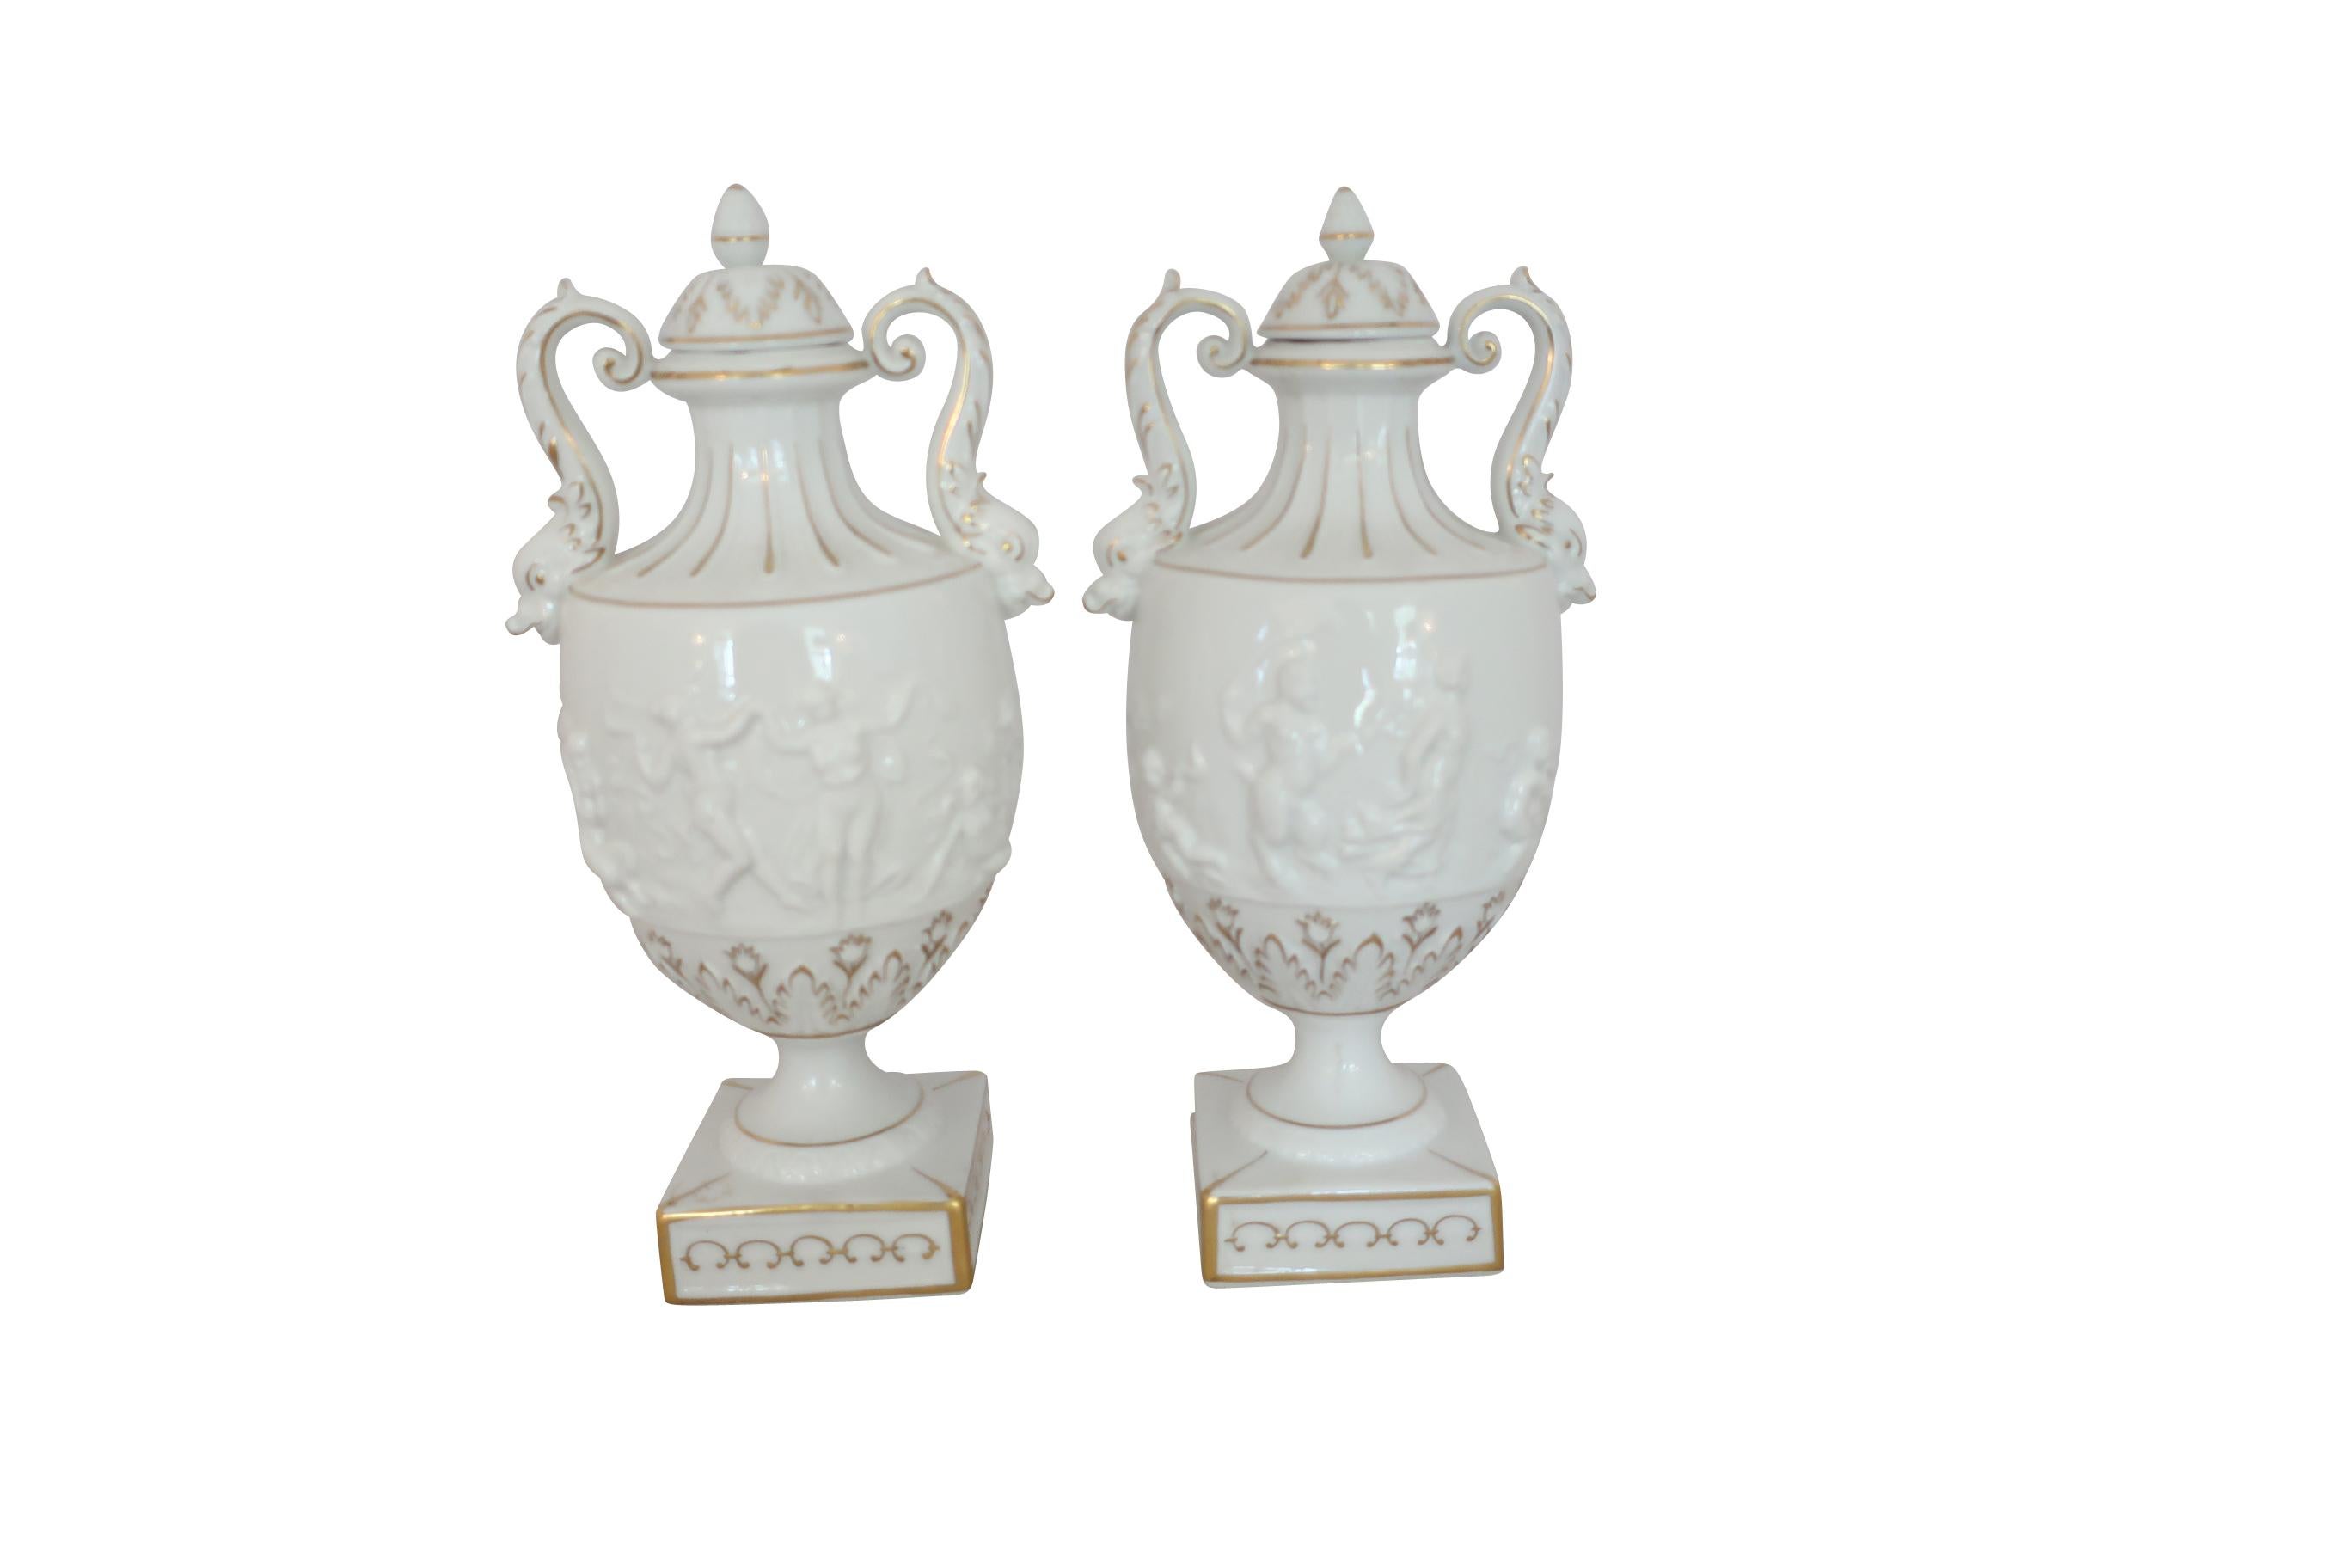 Pair of white and gilt hand painted Capodimonte classical urns with lids on a tapering square base. The urns have Classic scrolled handles and are decorated on the bodies with raised putti motifs. Small tulip-shaped gilt floral decorations below the